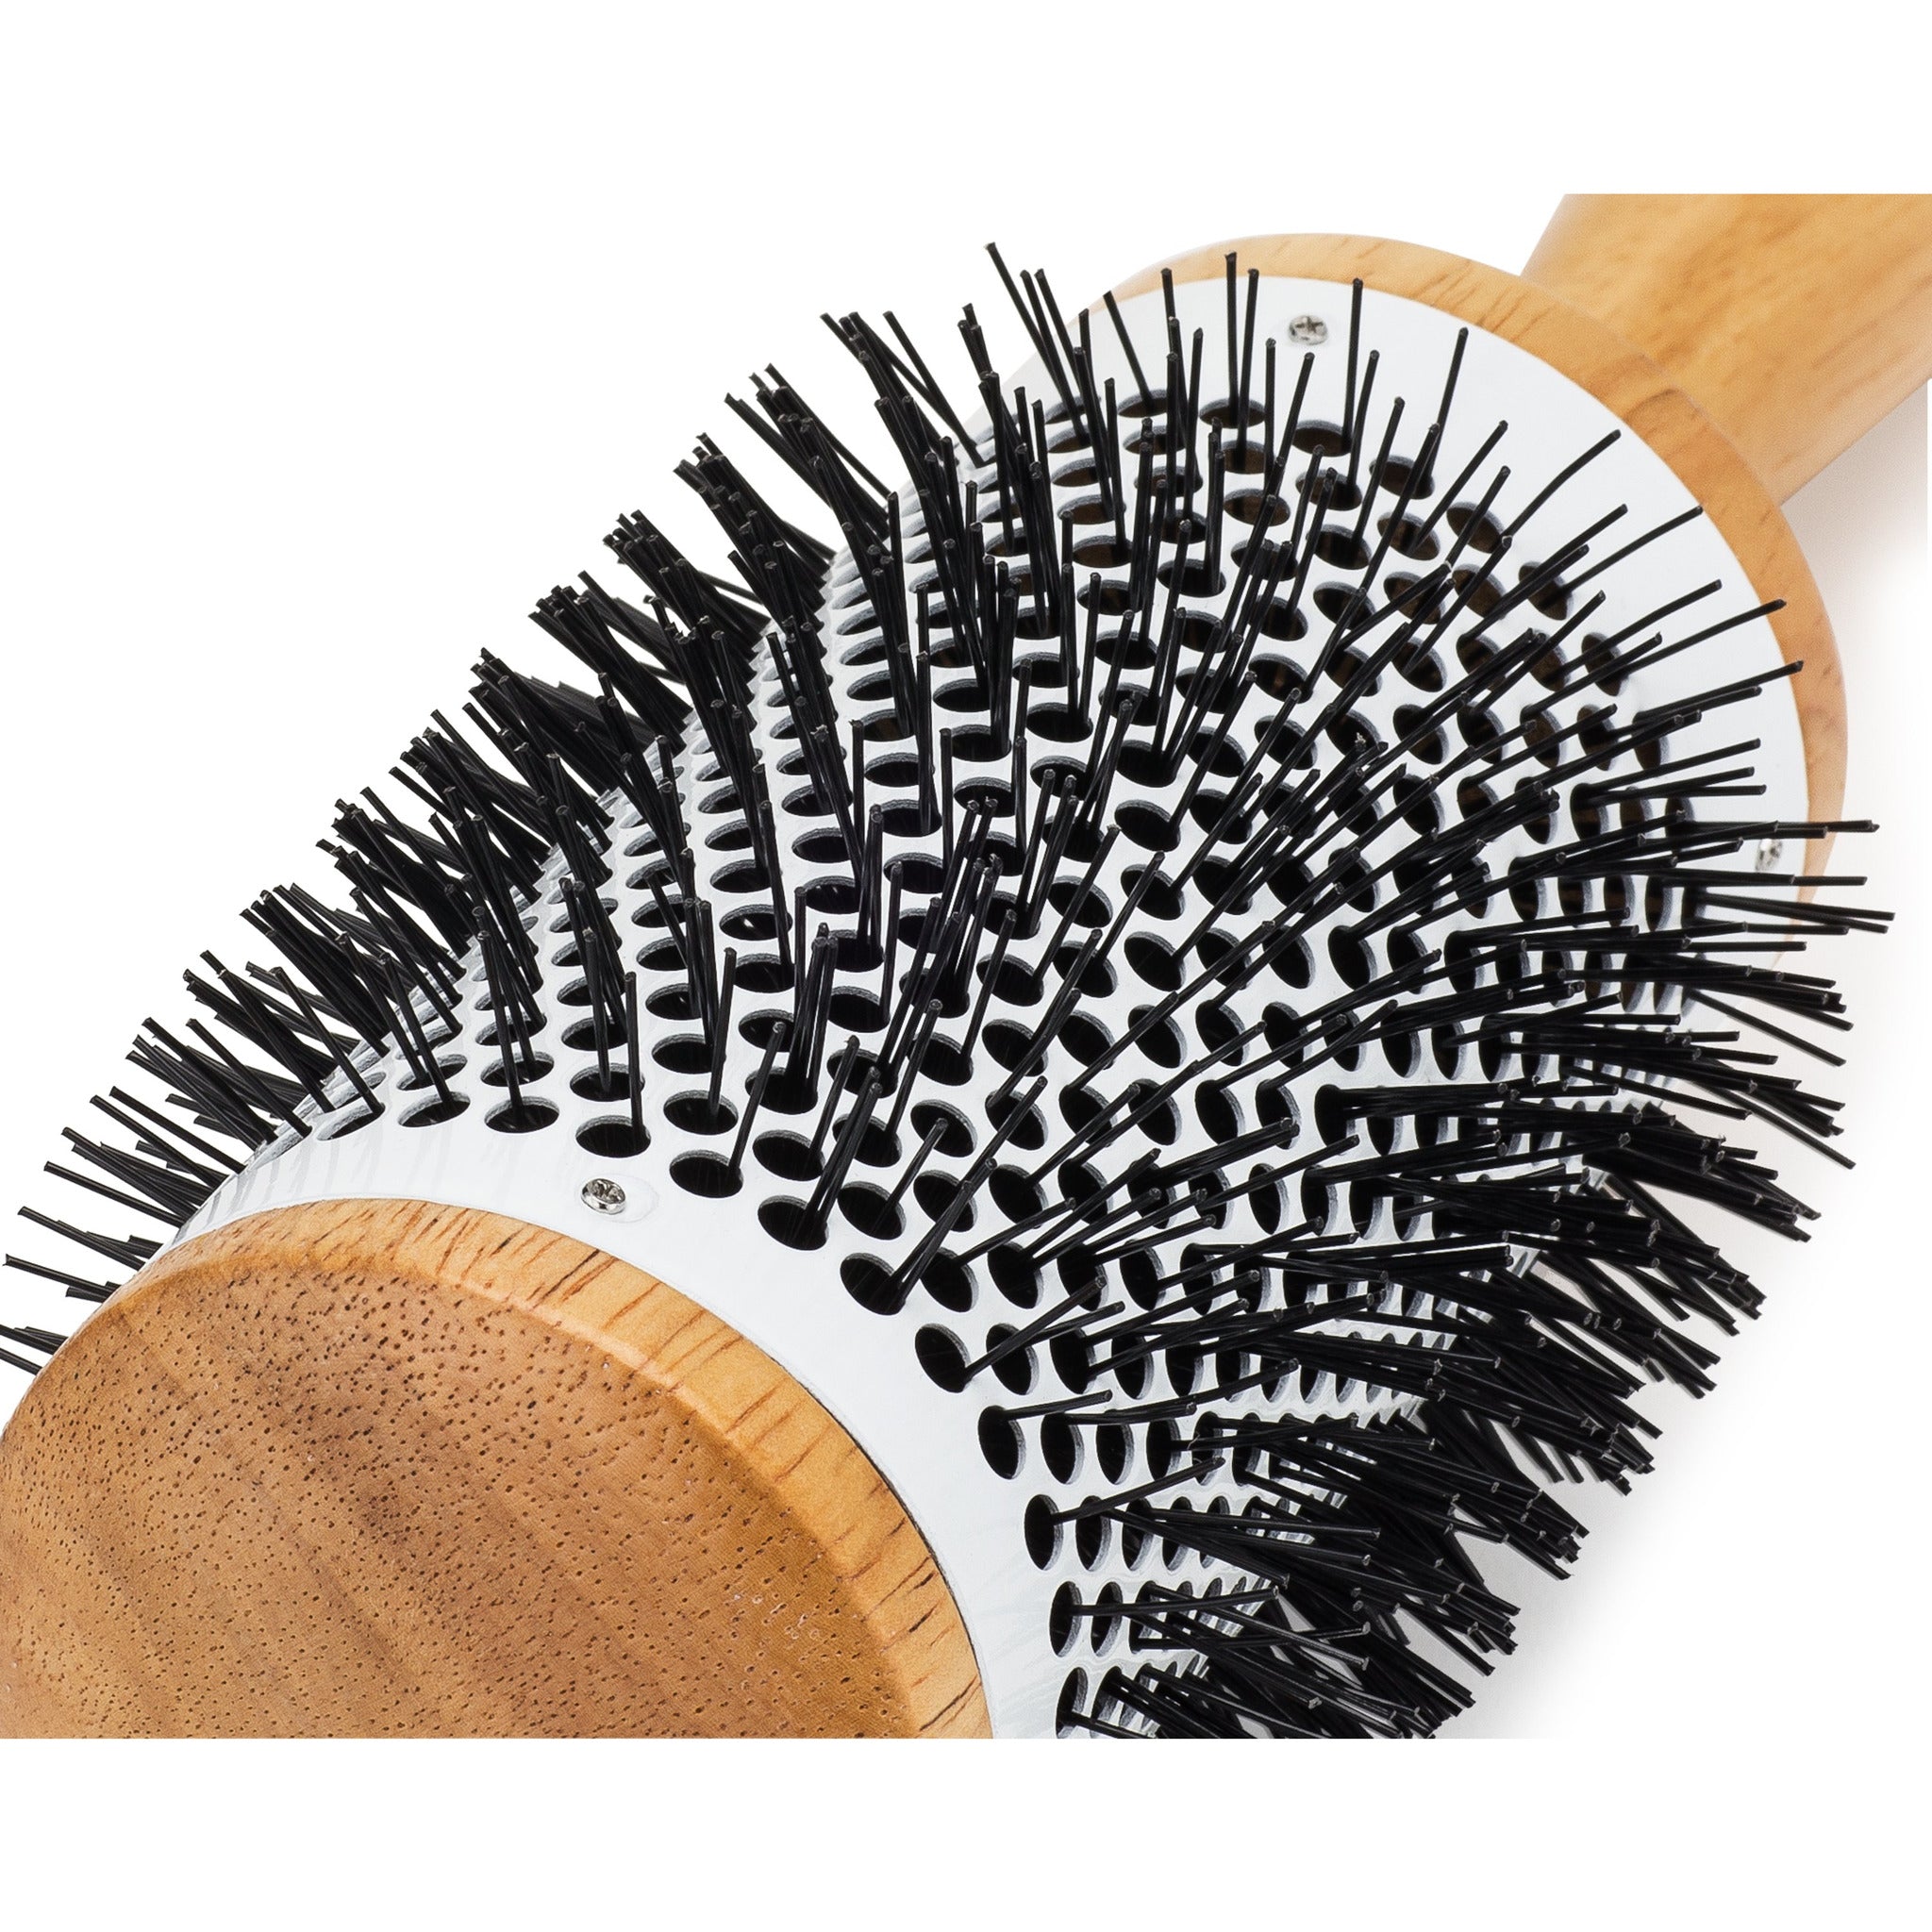 Round Blow Dryer Brush - Ceramic Barrel - Large 2.3 Inch Round Brush for Blow Drying - Thermal & Ionic Roll Styling Hairbrush to Blow Dry - Natural Wooden with Nylon Bristles - Hair Brush For Women